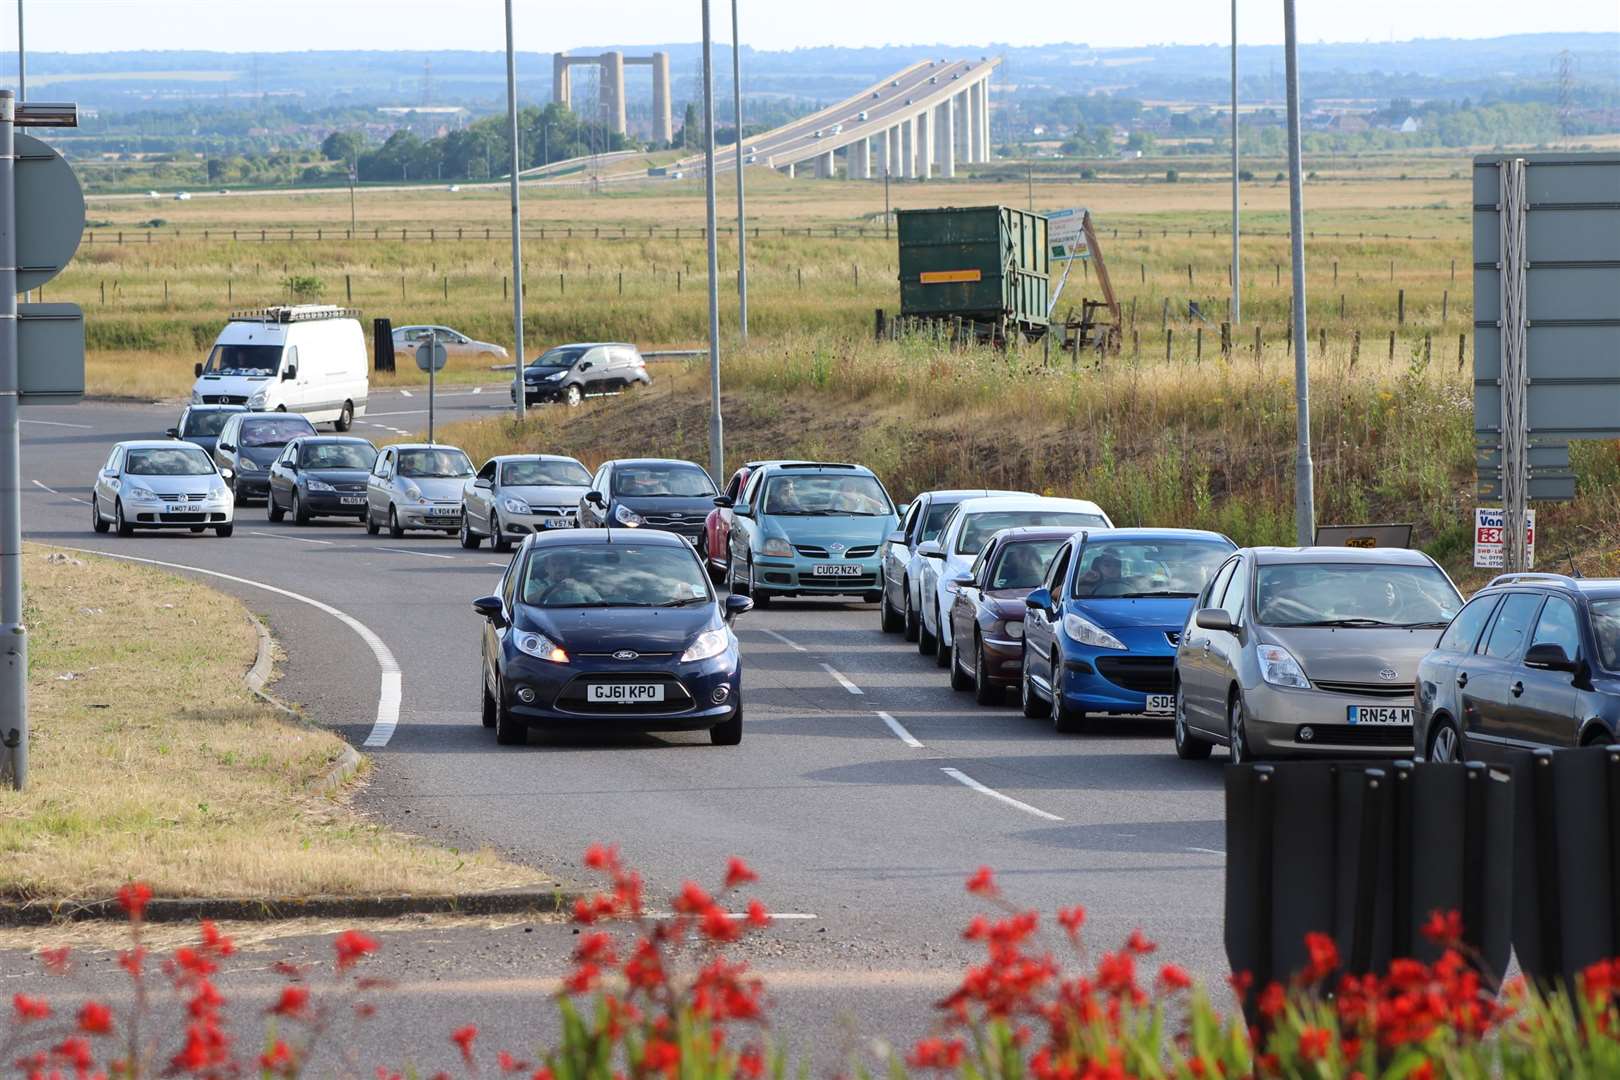 Traffic congestion at Cowstead Corner roundabout, A249, Sheppey